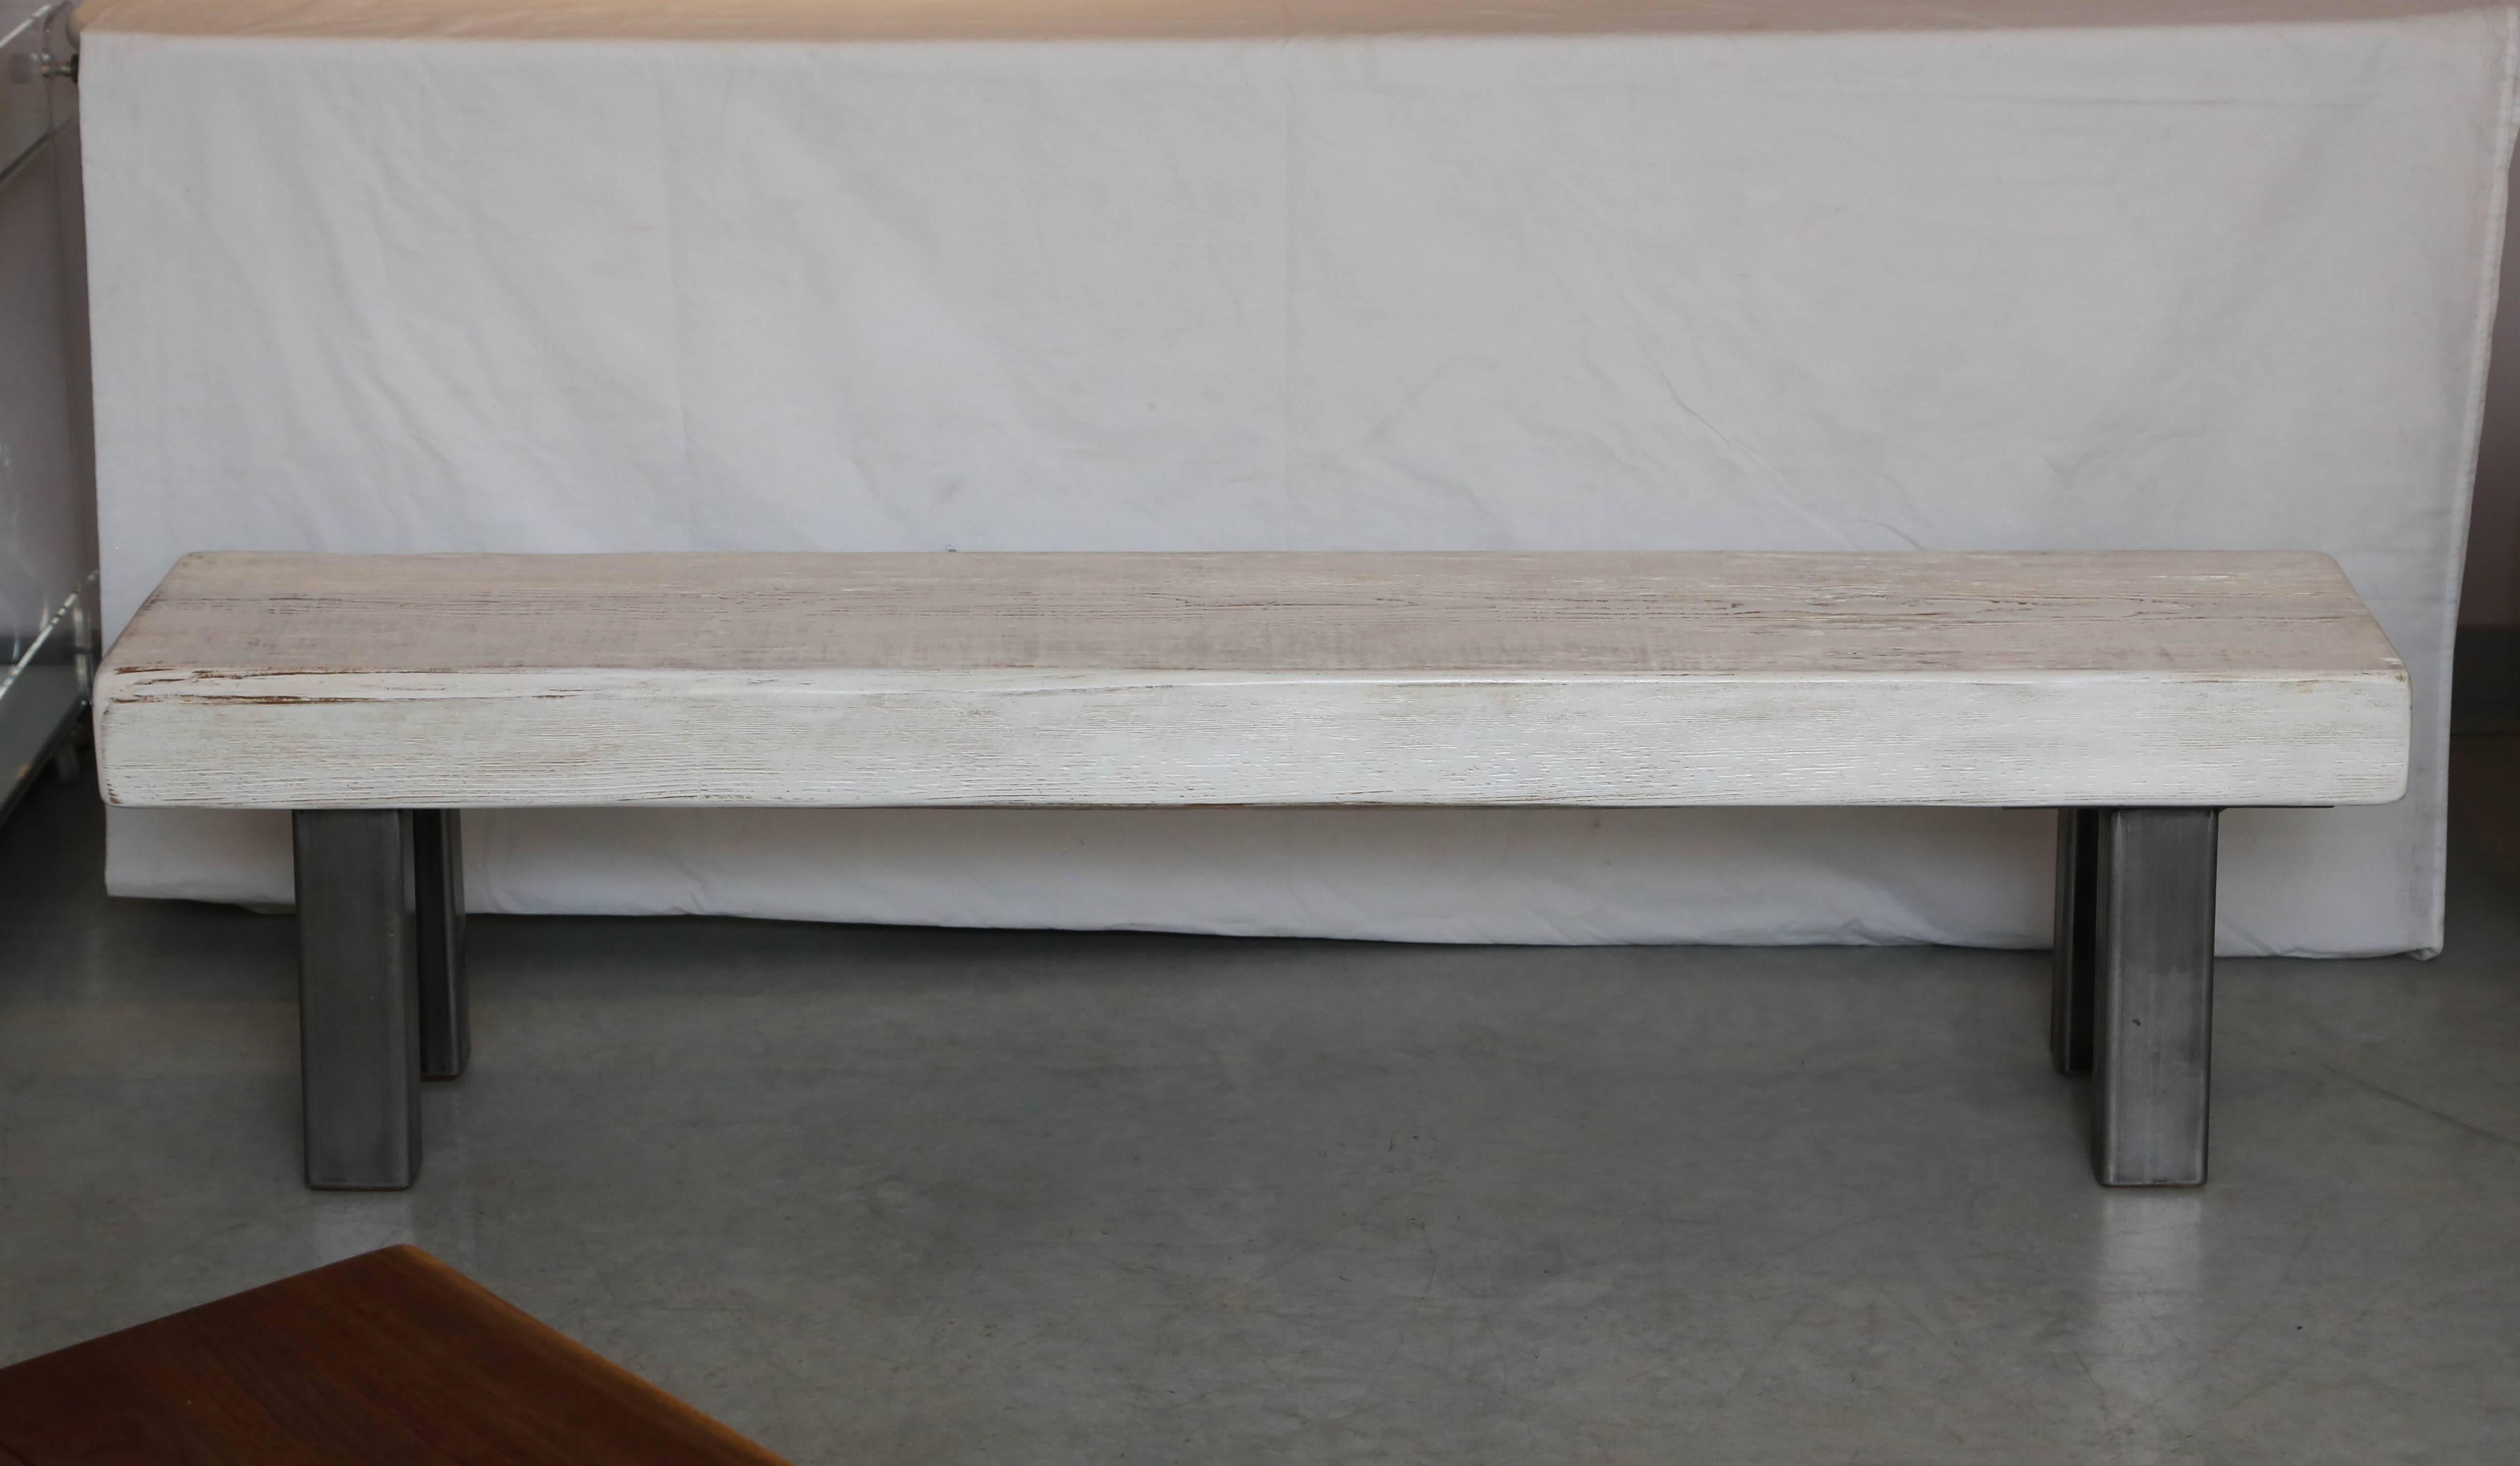 This bench is handcrafted by a Floridian artist, we can custom your order.

The material is cedar,which is lightweight wood and impervious to insects.
Finish is a clear sealer which will not yellow over time.

It is possible to put the bench outside